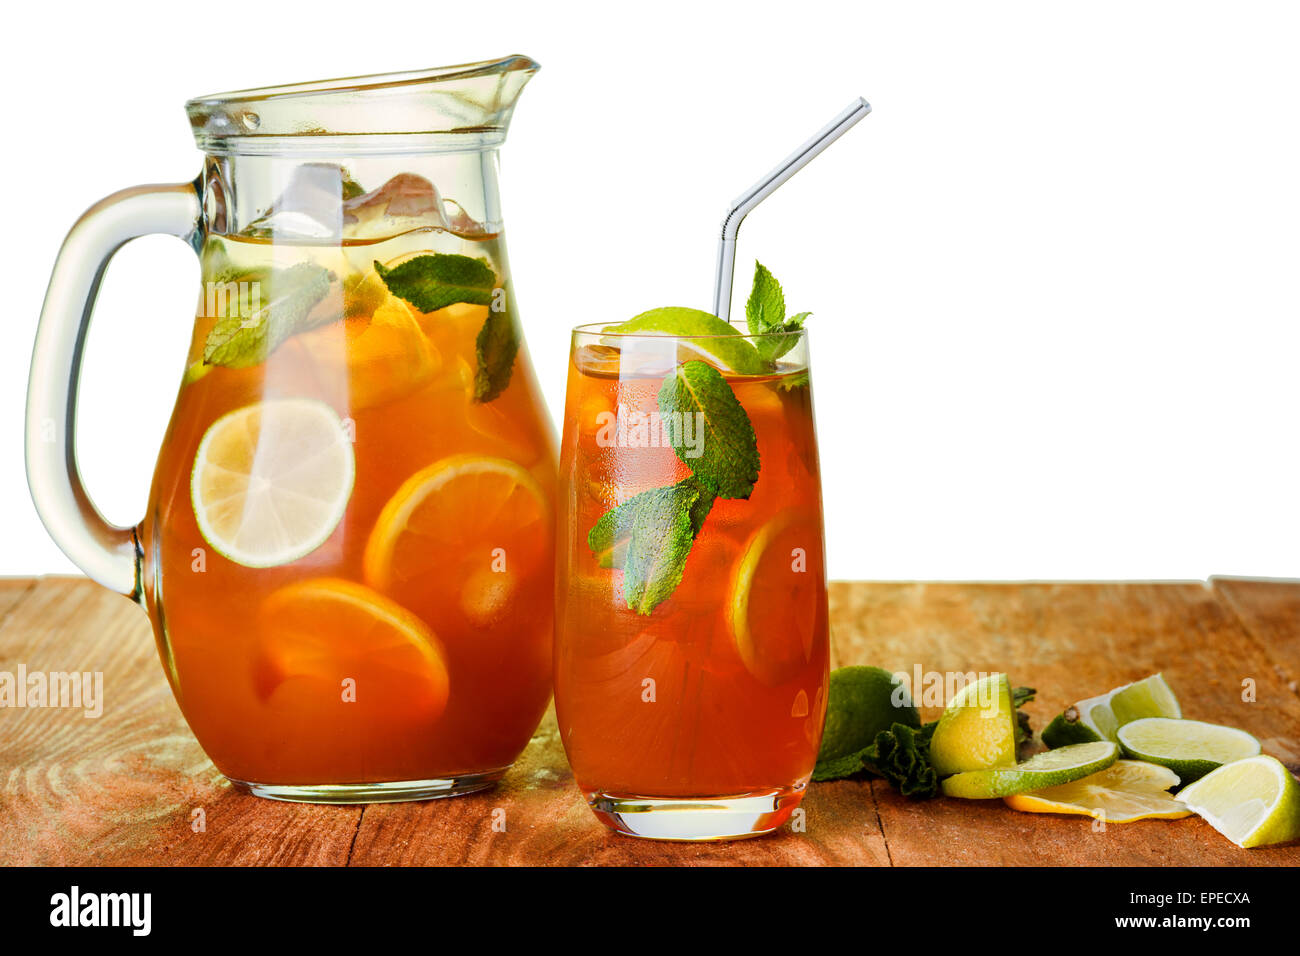 https://c8.alamy.com/comp/EPECXA/iced-tea-in-the-pitcher-and-the-glass-jug-of-cold-iced-drink-with-EPECXA.jpg